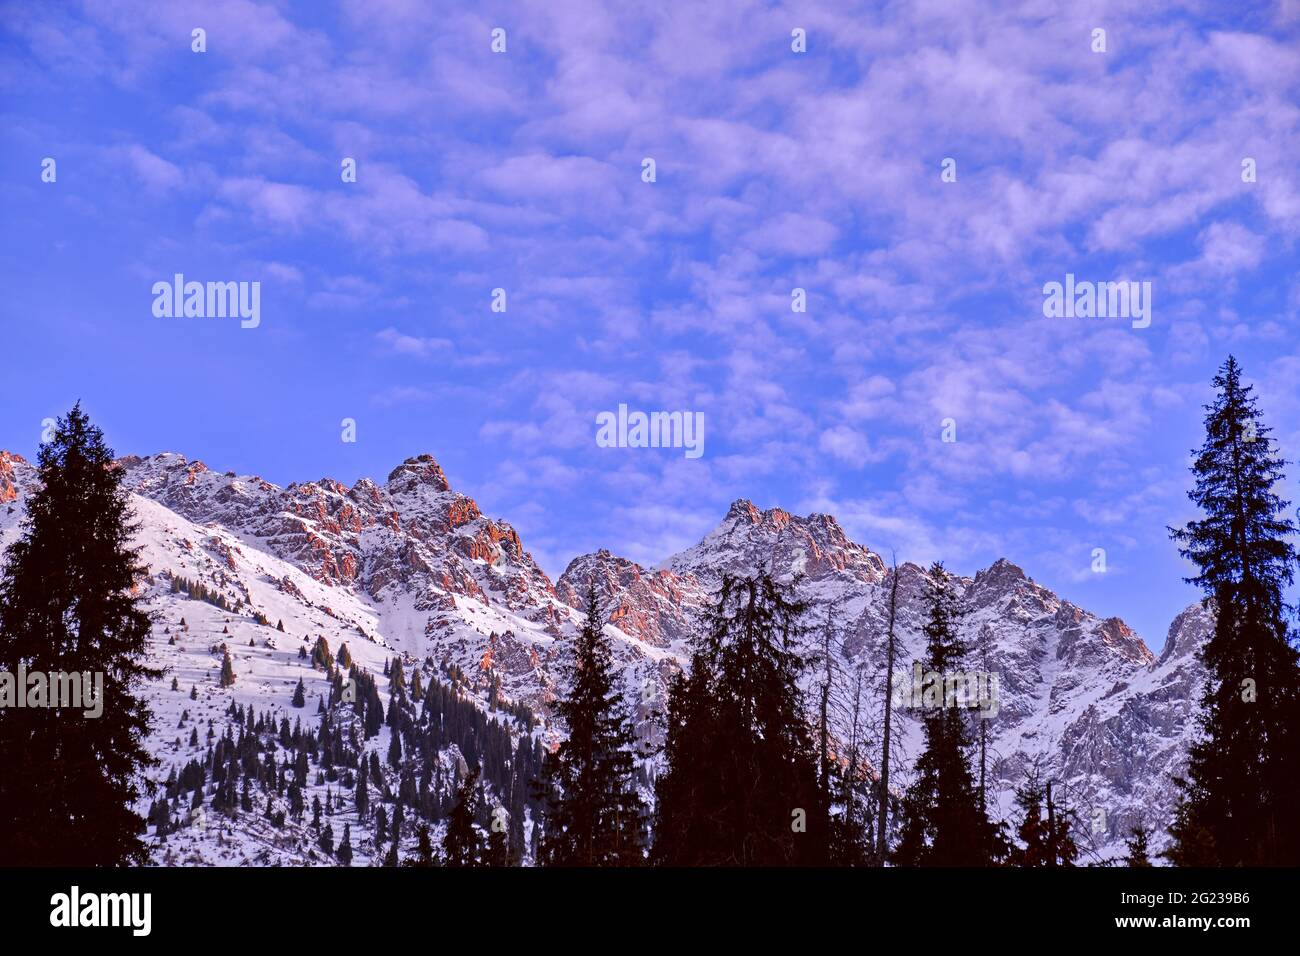 Majestic rocky peaks with fir forest against a blue sky with clouds in the winter season Stock Photo